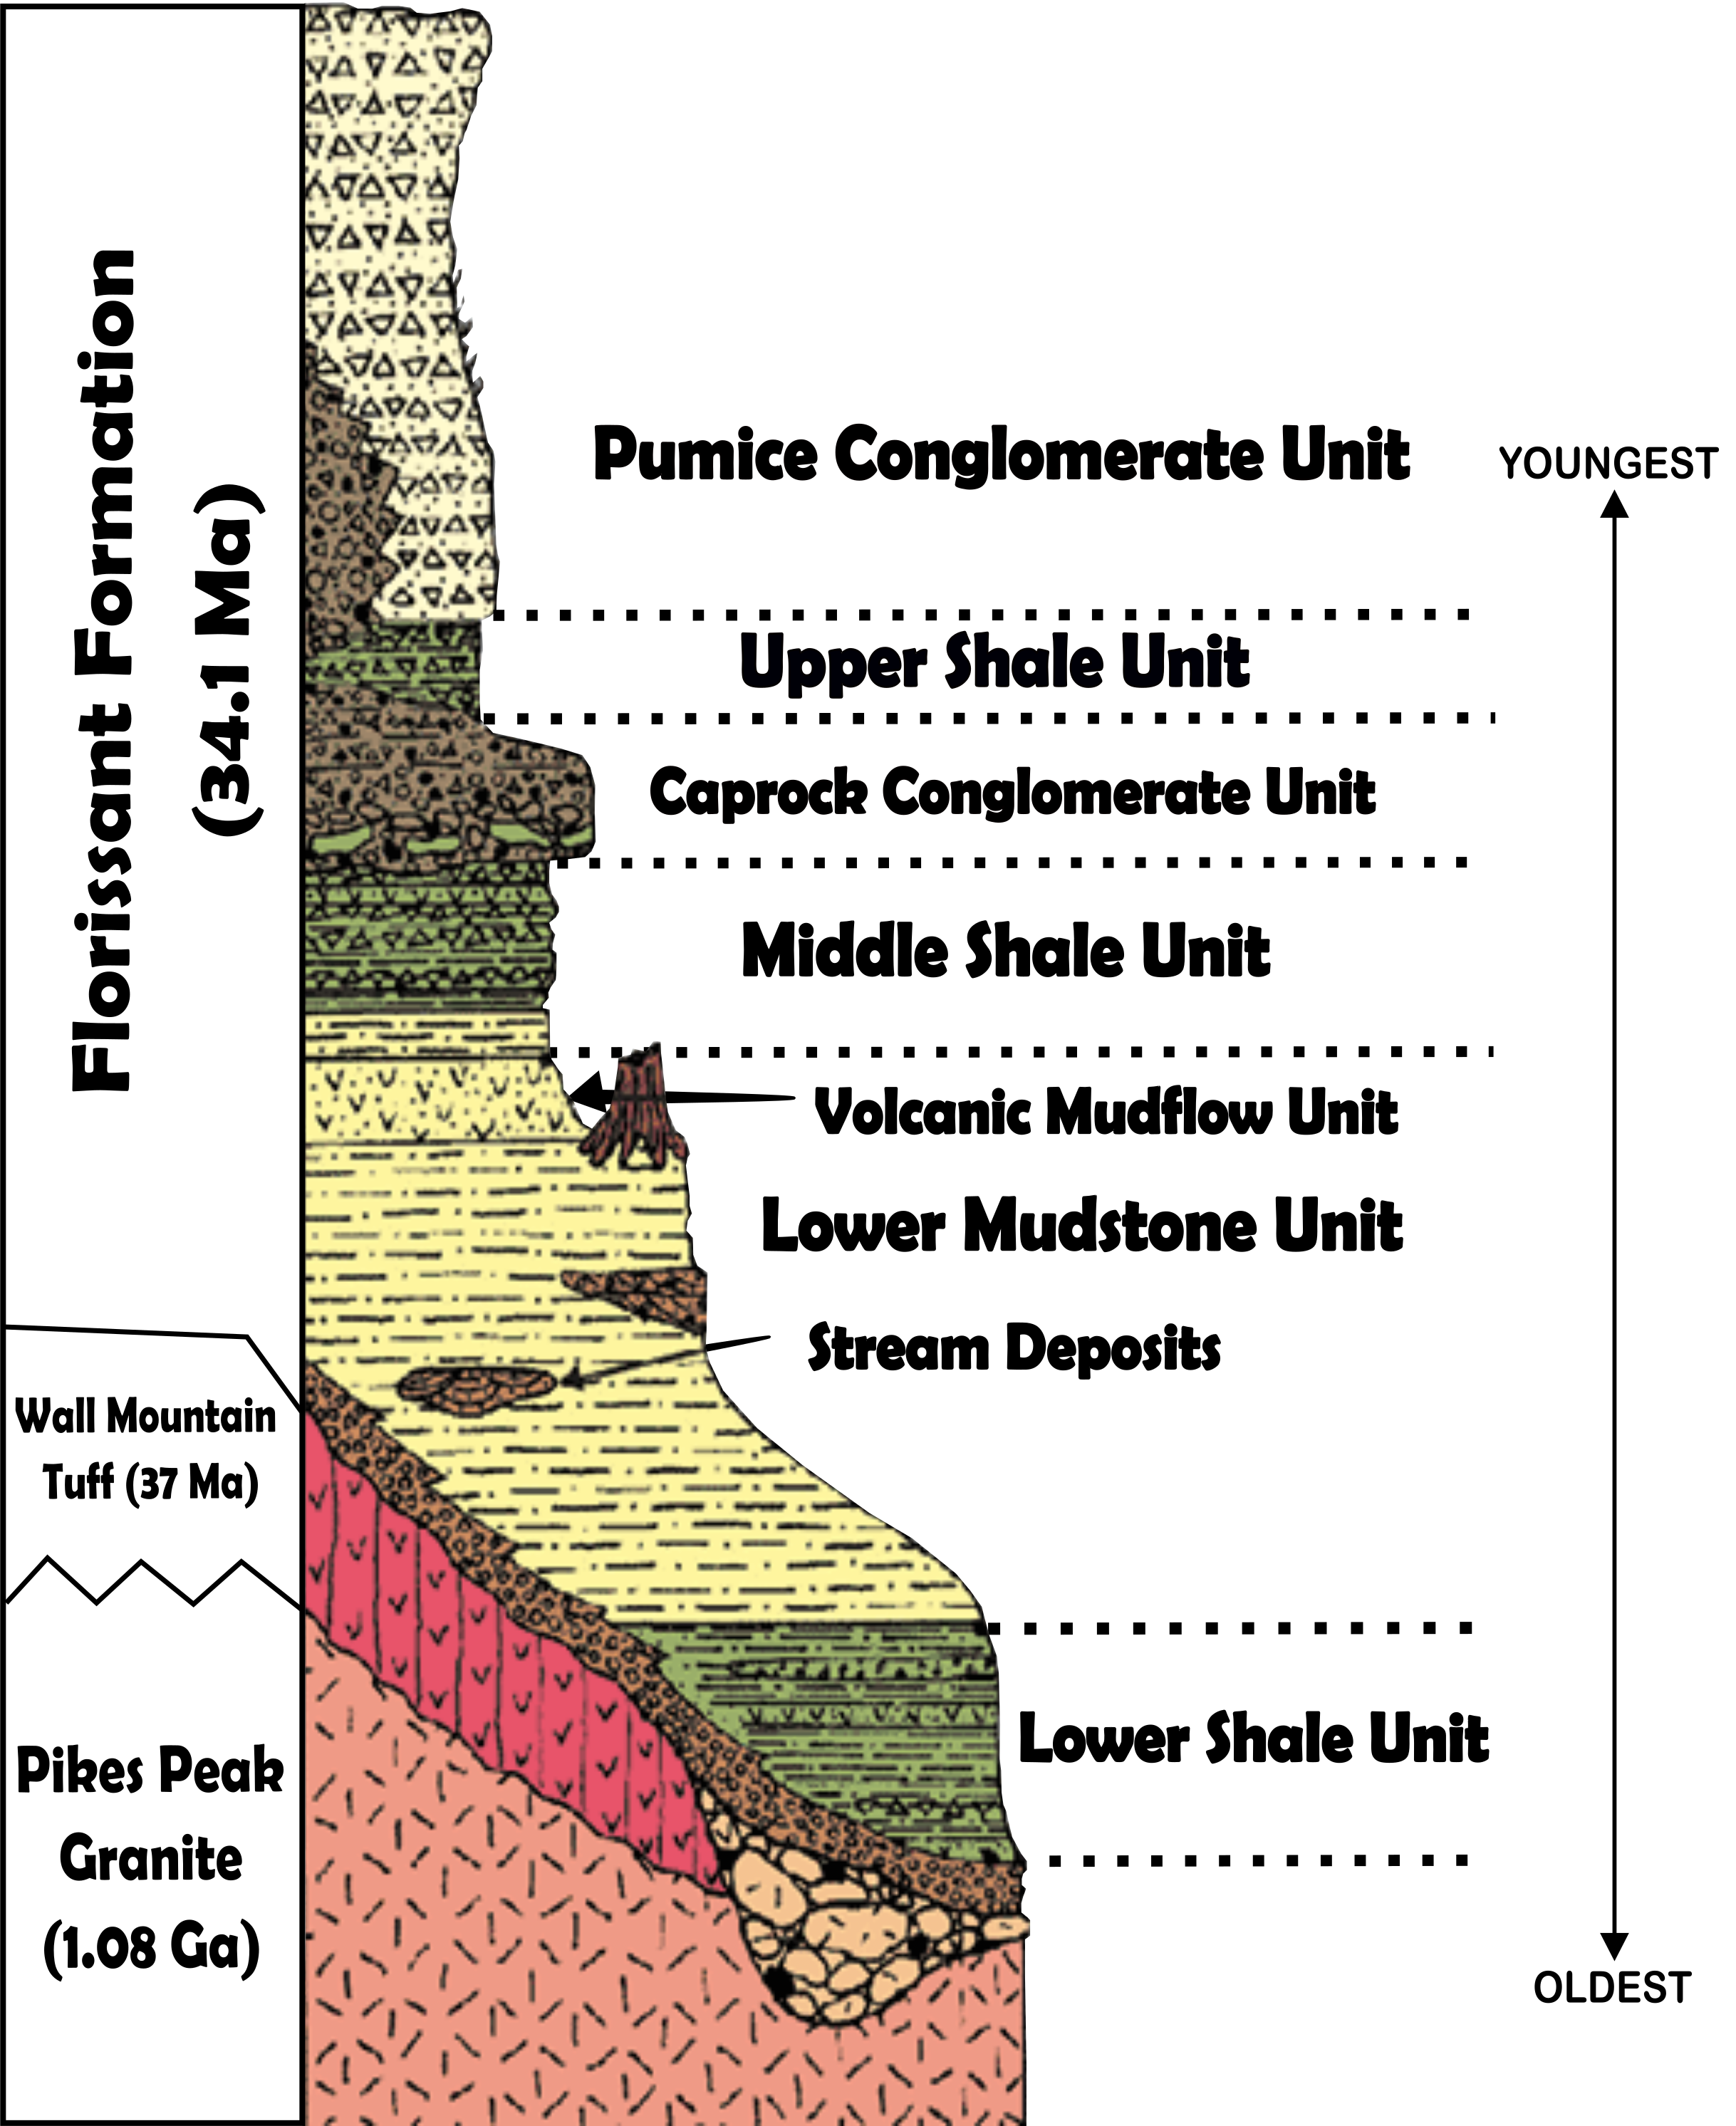 Diagram showing the rock layers seen at Florissant Fossil Beds.